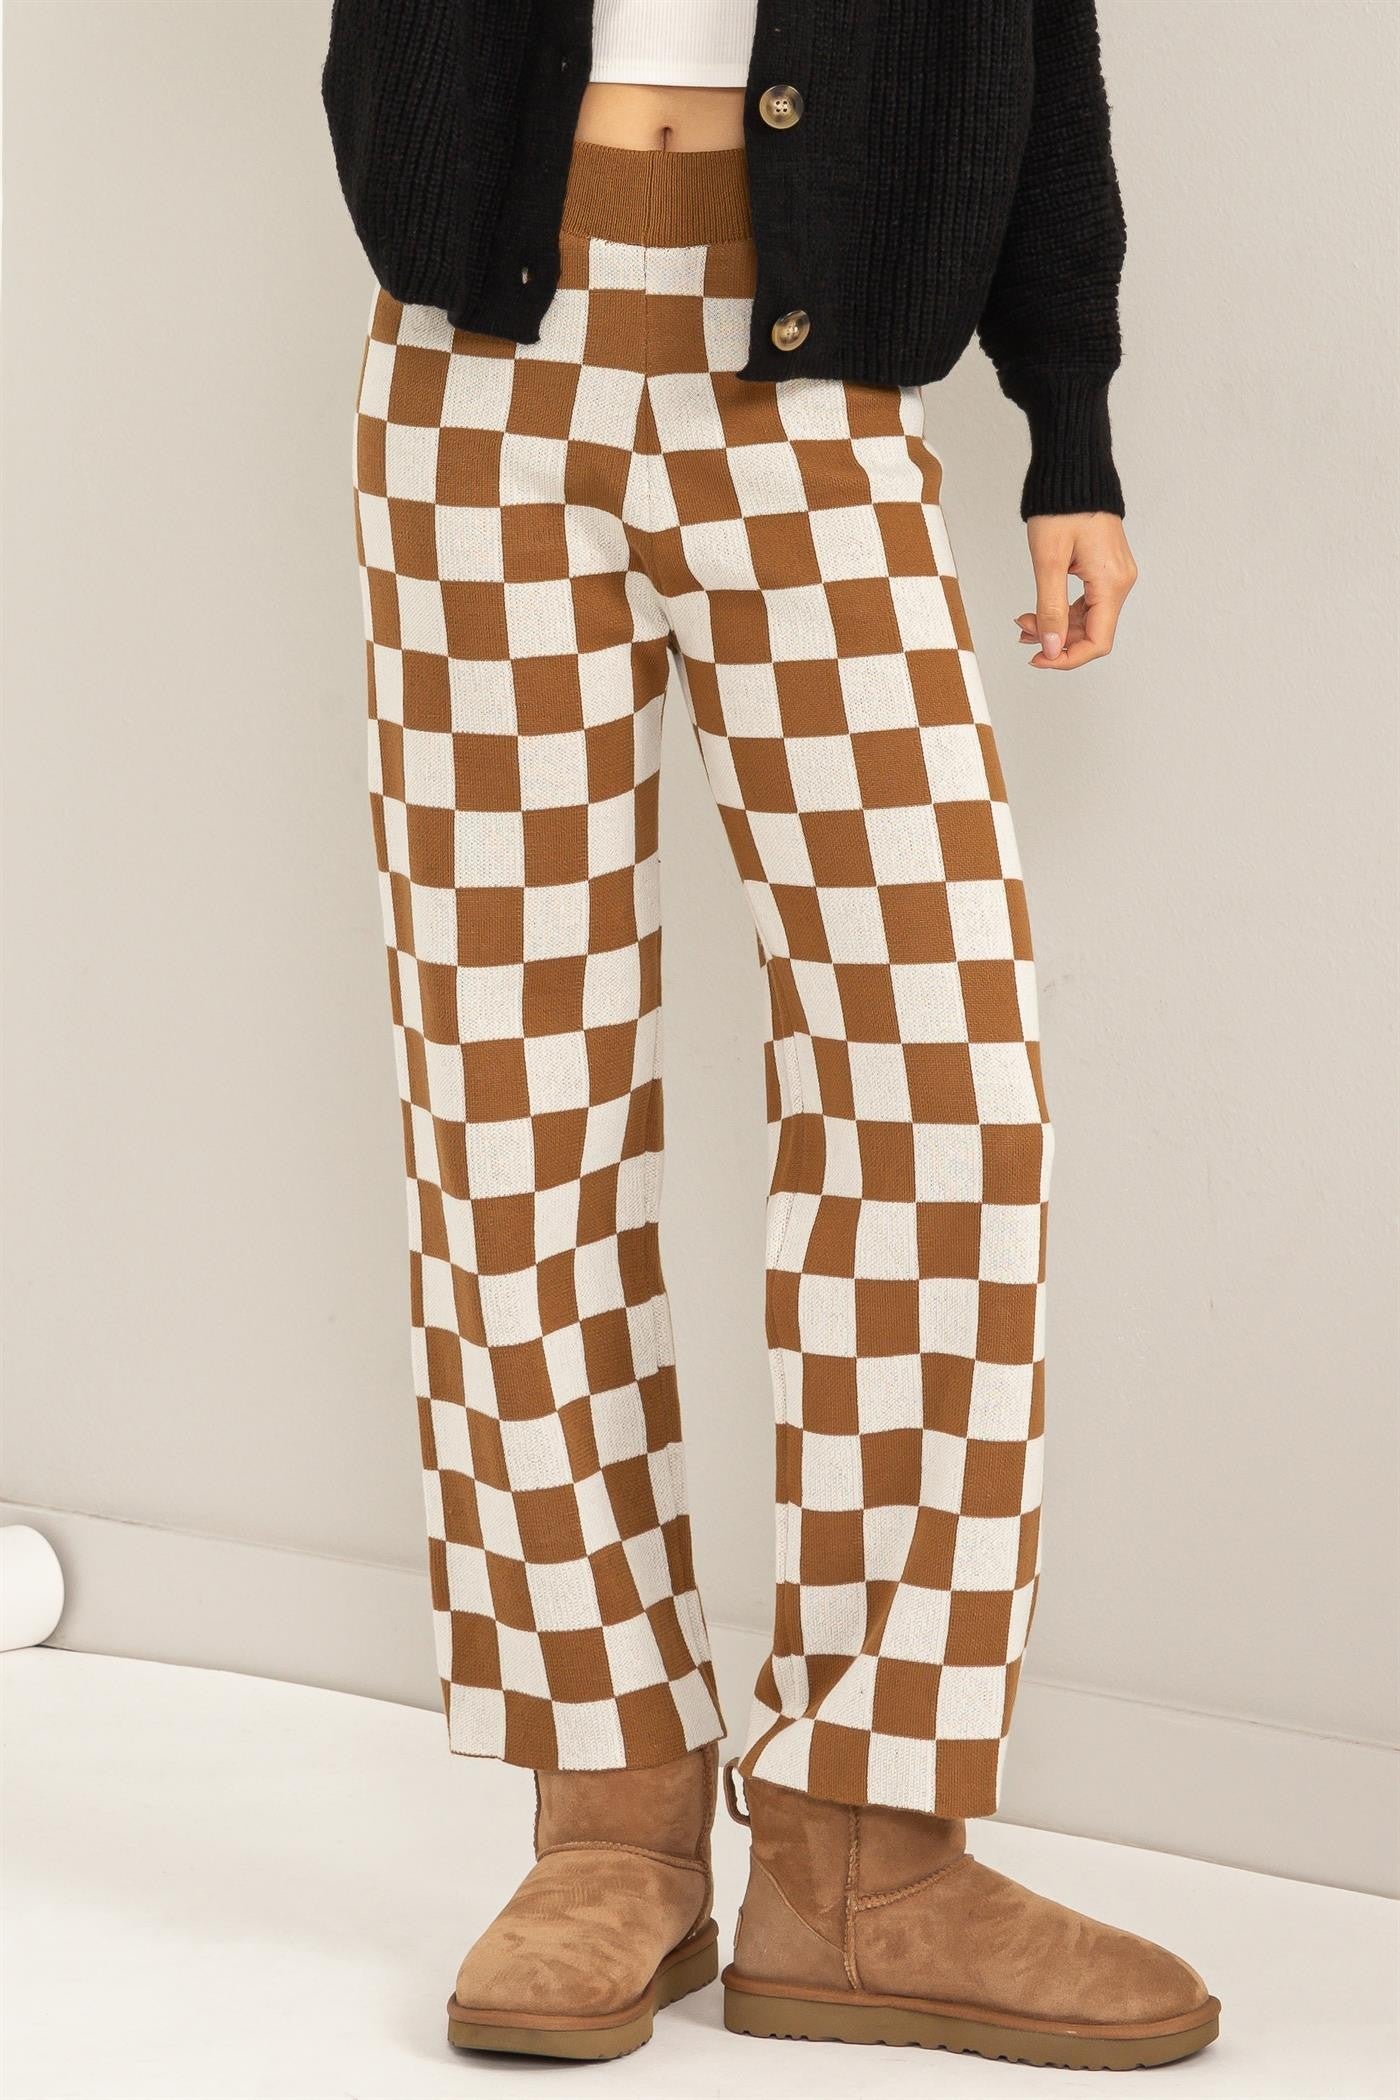 In Check Patterned Pants